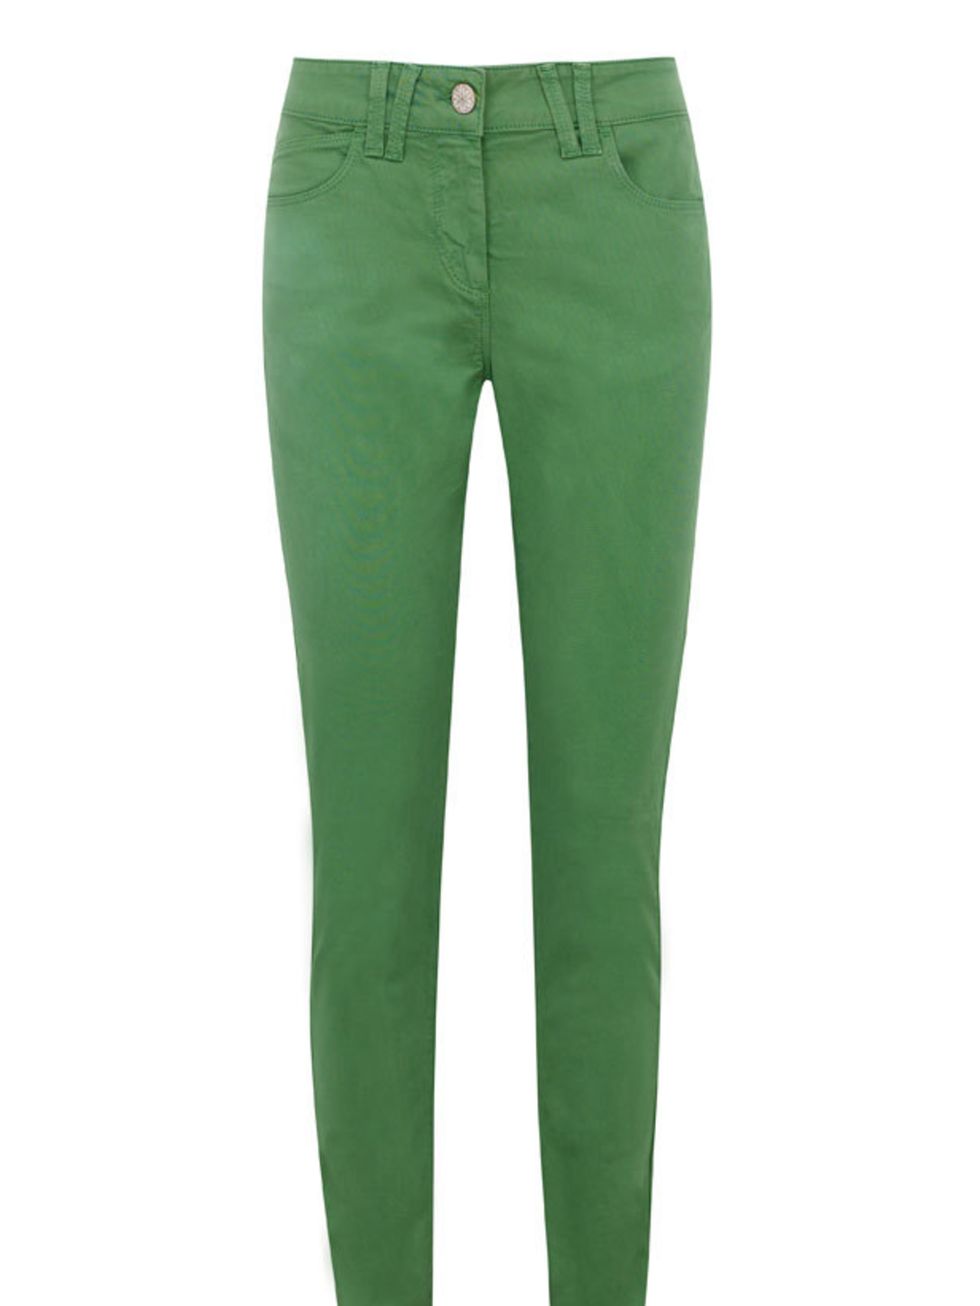 <p>The coloured jeans trend is set to continue into spring so head to M&amp;S for the best the high street has to offer <a href="http://www.marksandspencer.com/Womens/b/42967030?ie=UTF8&amp;ie=UTF8?ie=UTF8&amp;intid=gnav_Women&amp;pf_rd_r=1YAQJA8CA0PSXH8